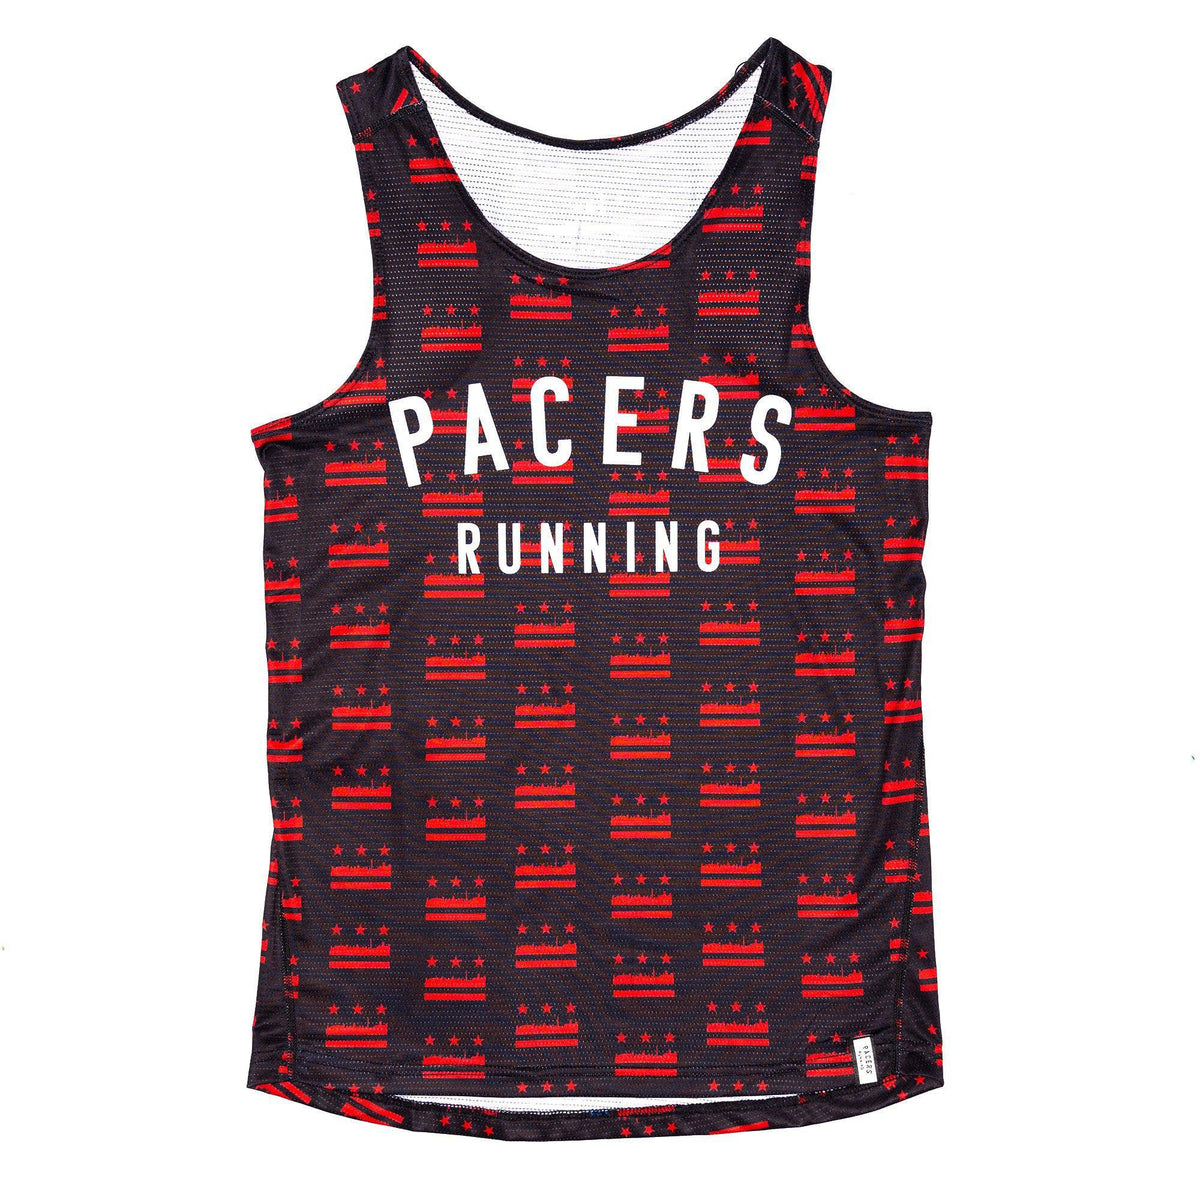 On the Run with Pacers